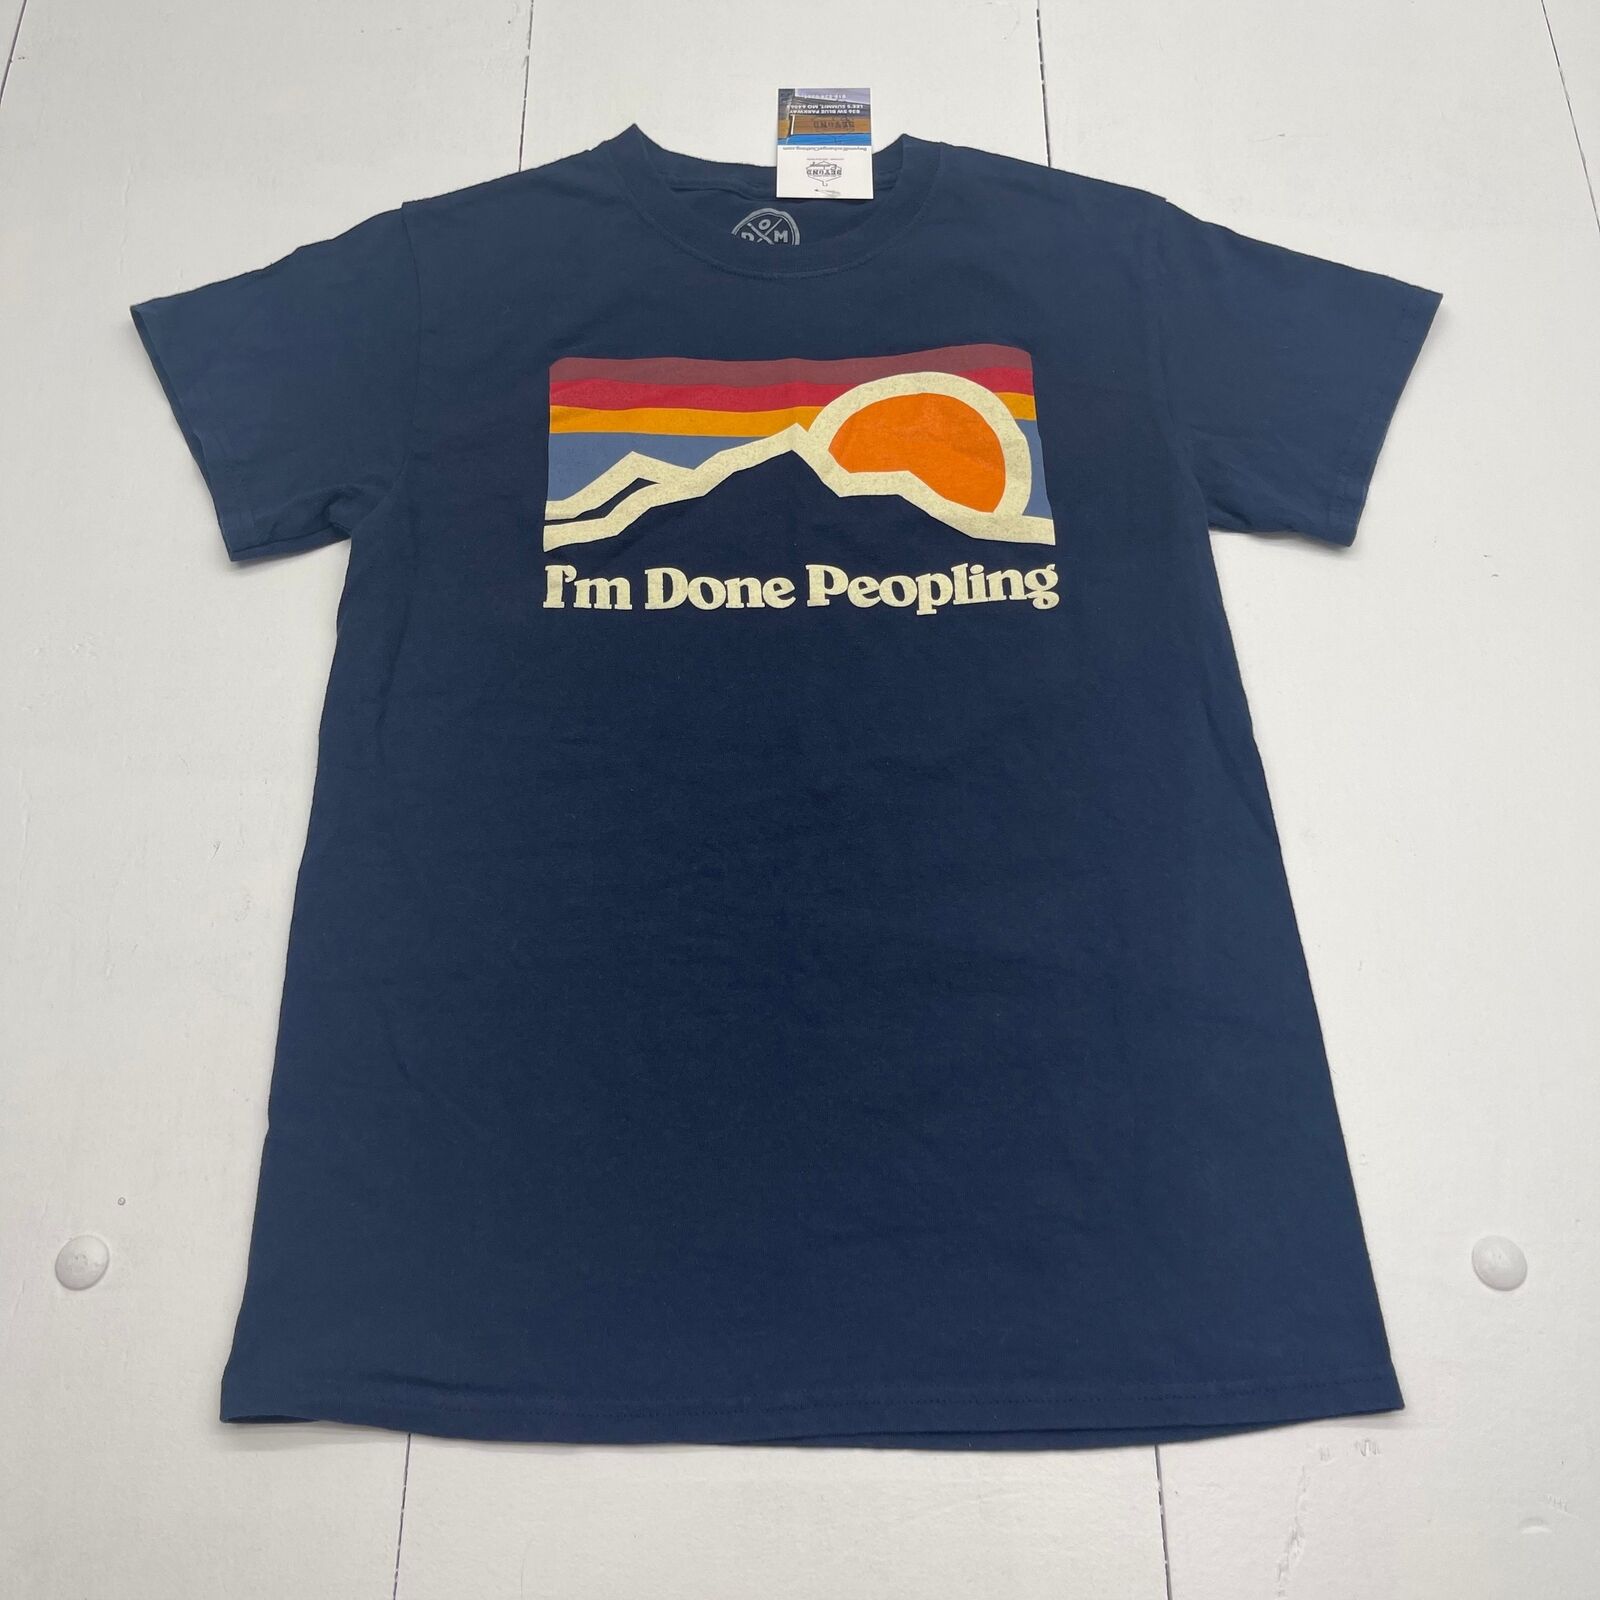 DOM “I’m Done Peopling” Navy Blue Short Sleeve T Shirt Mens Size Small